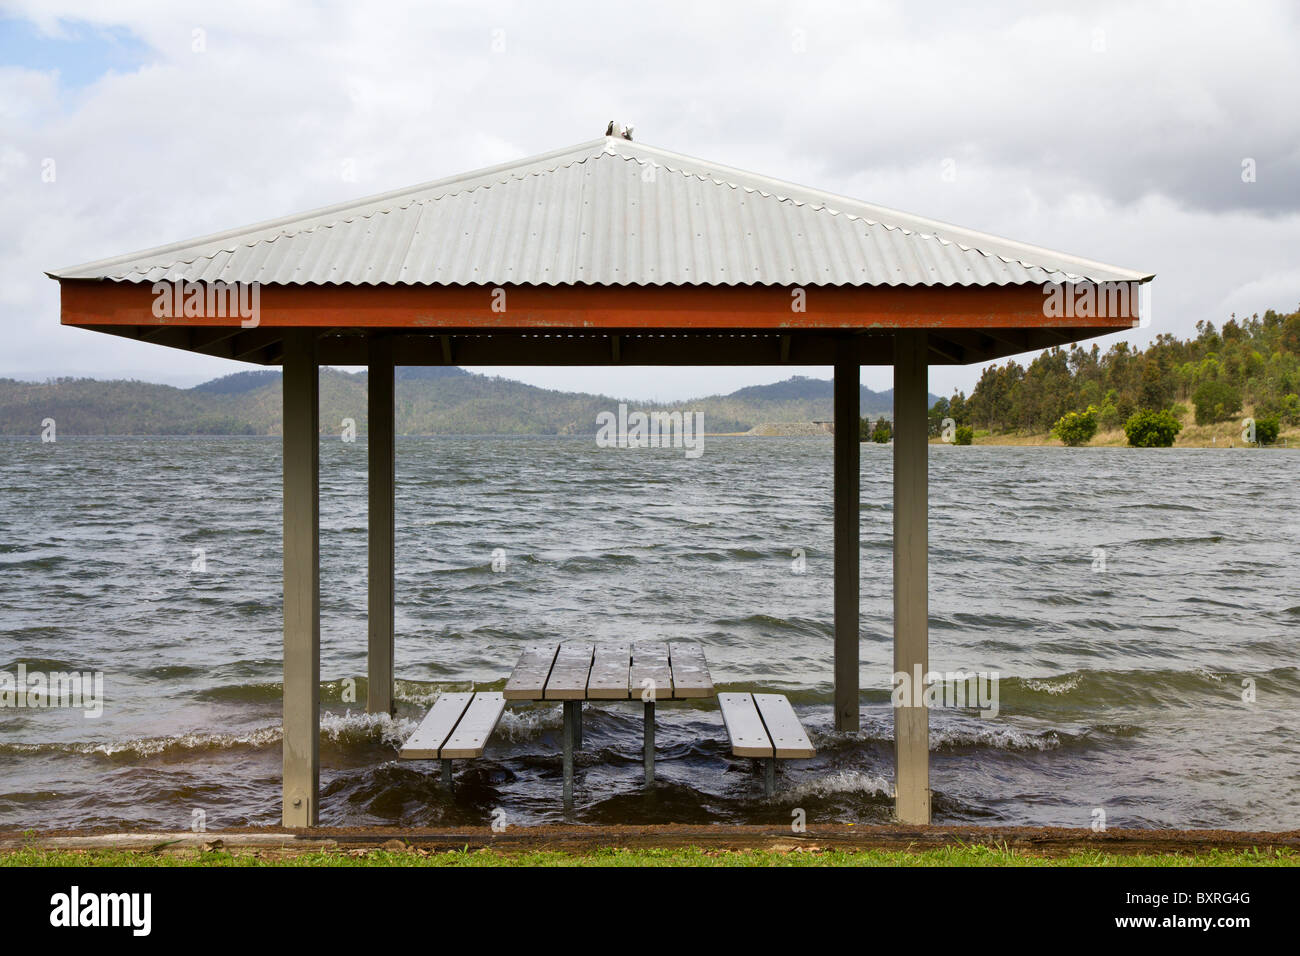 Flooded picnic shelter at Wivenhoe Dam, Queensland, Australia Stock Photo